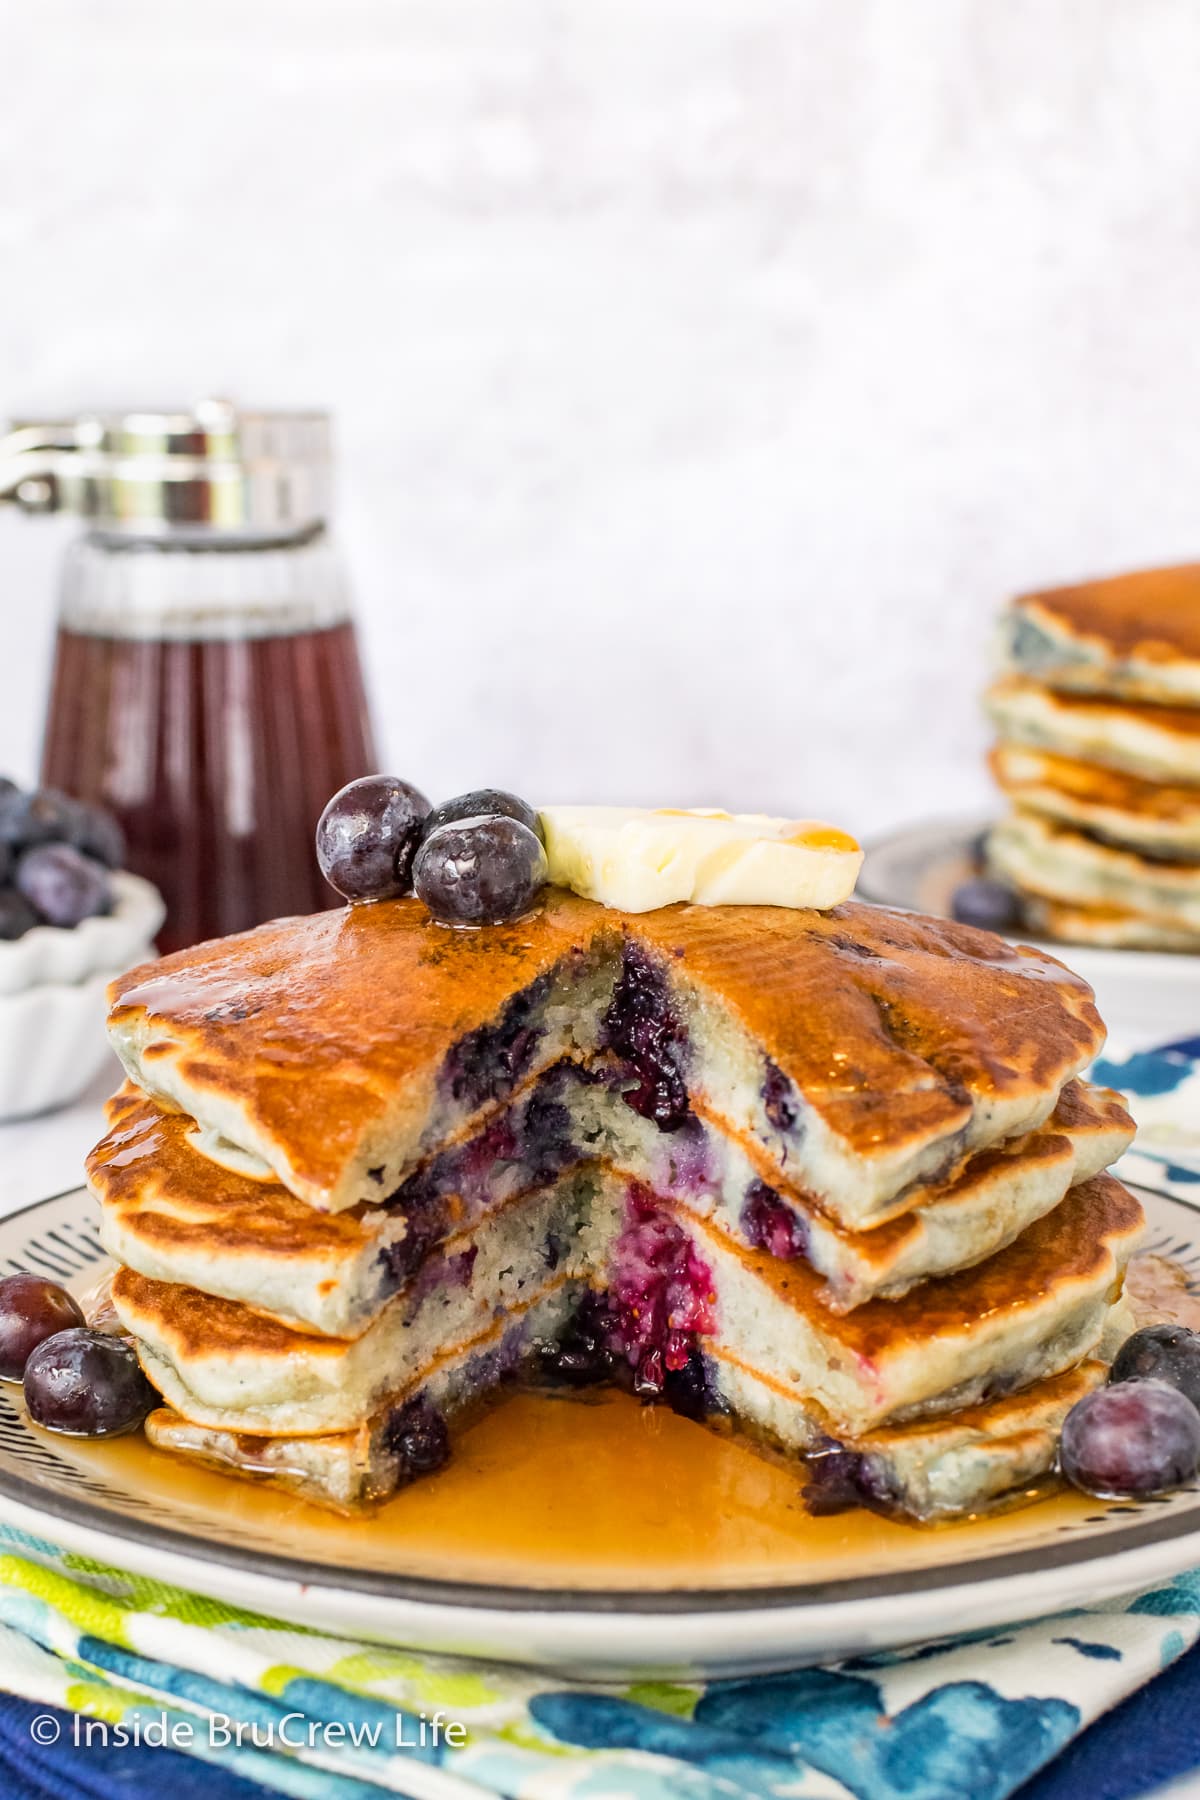 A stack of pancakes on a plate cut showing the blueberries inside.